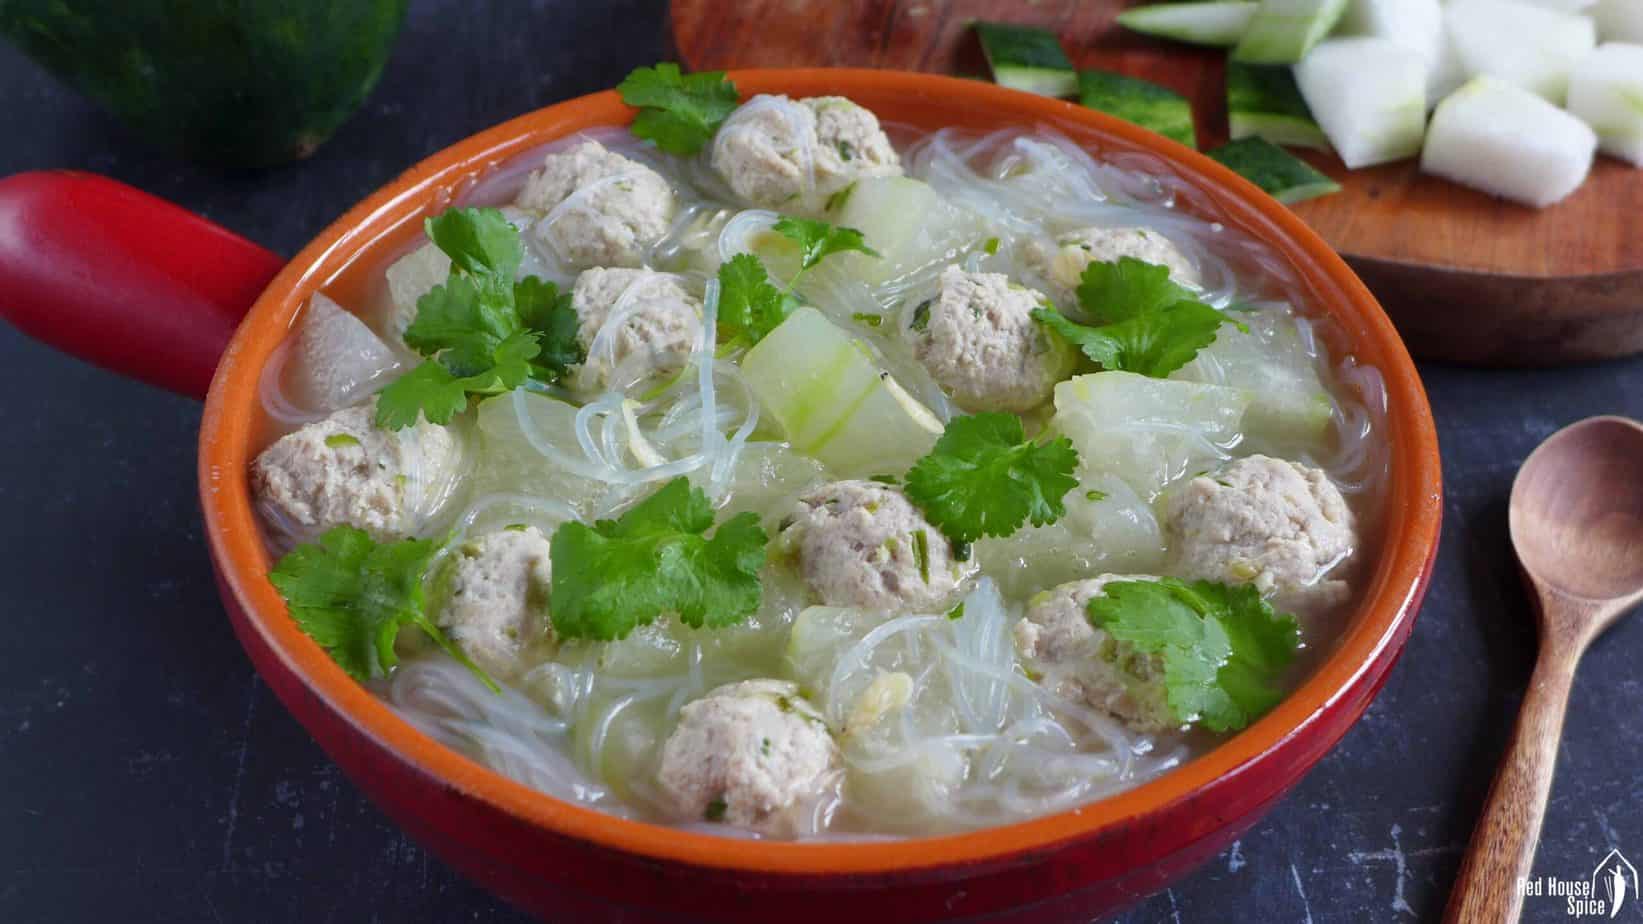 A pot of winter melon soup with meatballs and mung bean noodles